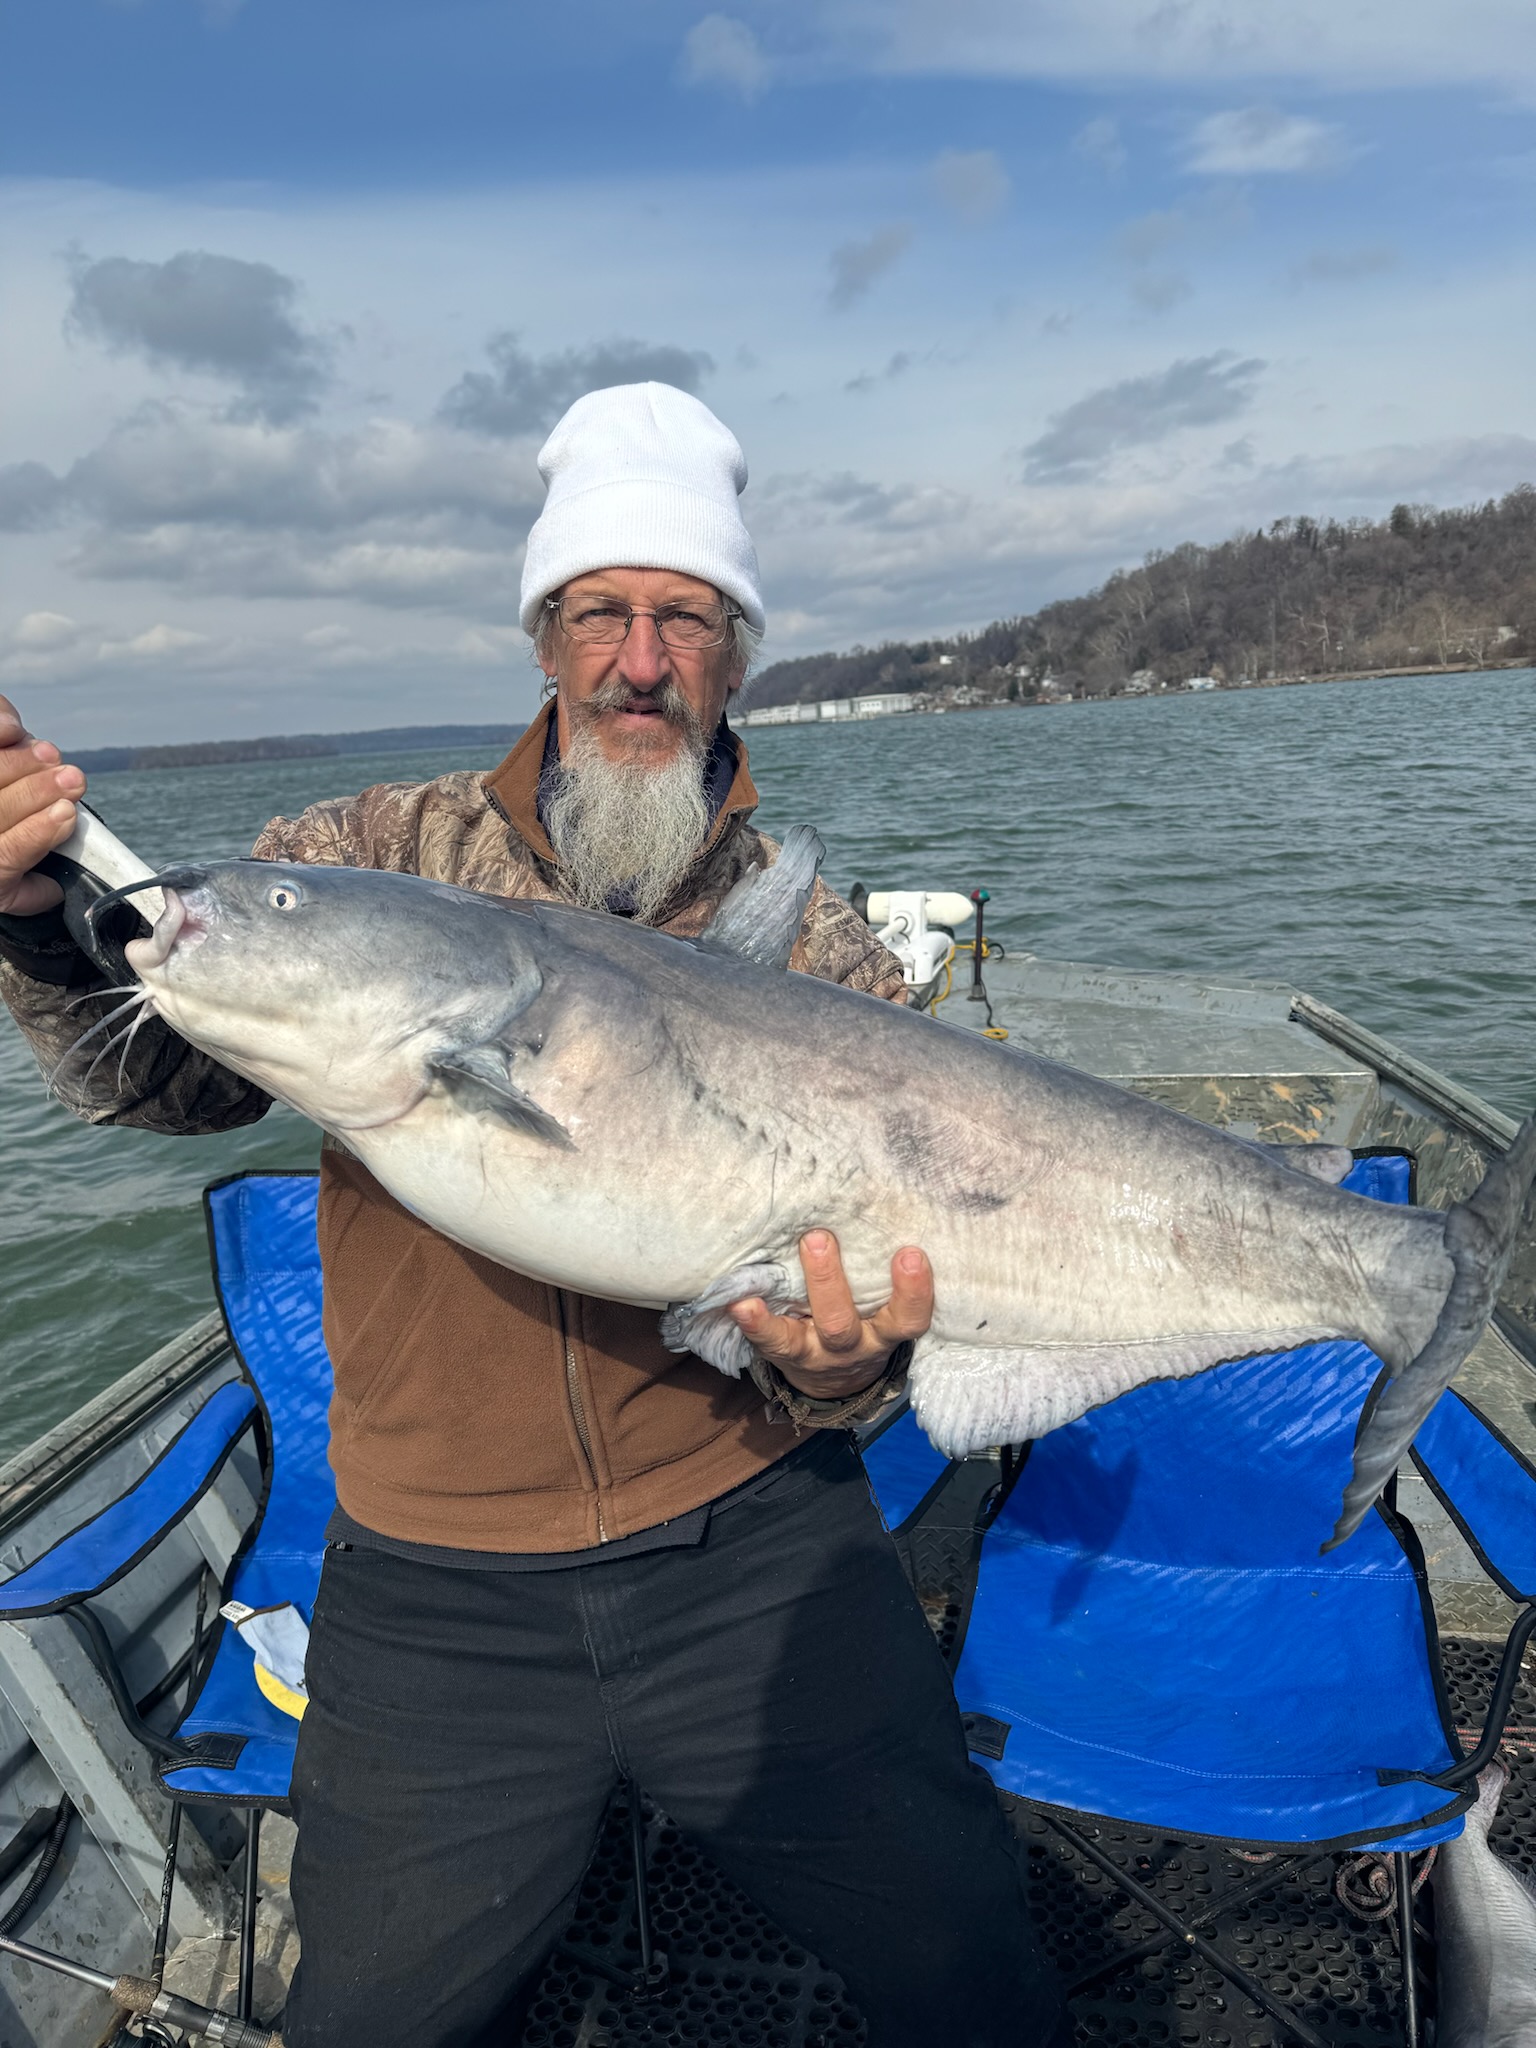 Blue Catfish Are Spreading Rapidly in Maryland Waters, As State